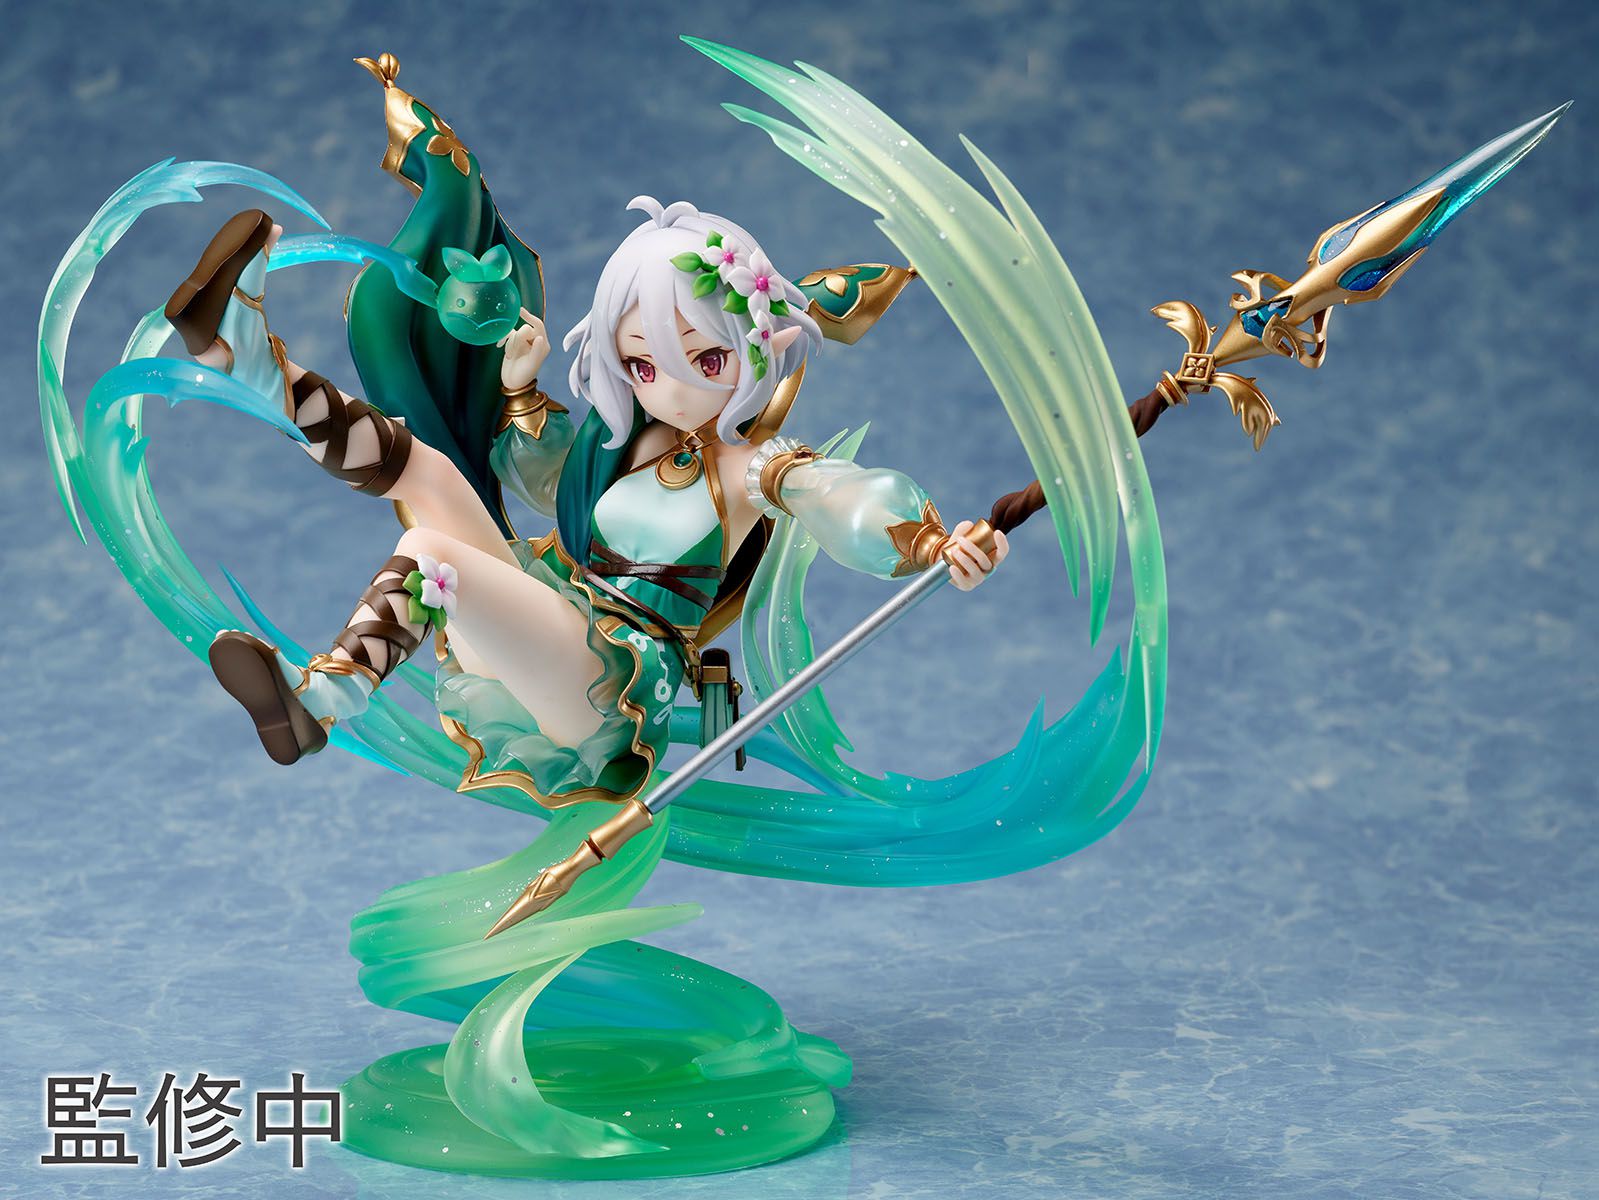 Hatsune Miku's new Gesen figure is too erotic with the highest quality ever 68